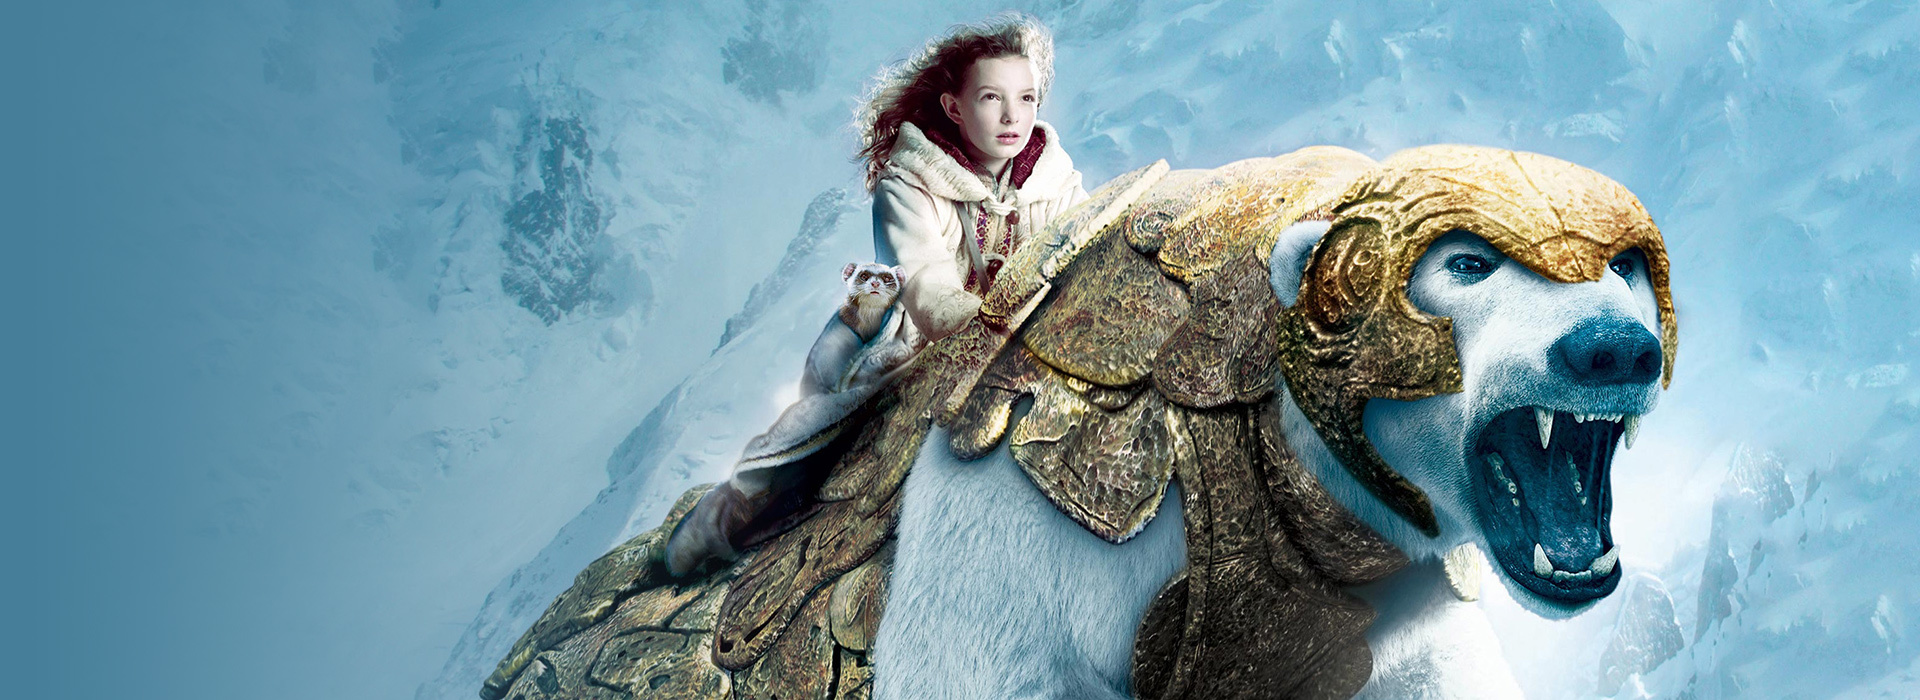 Movie poster The Golden Compass